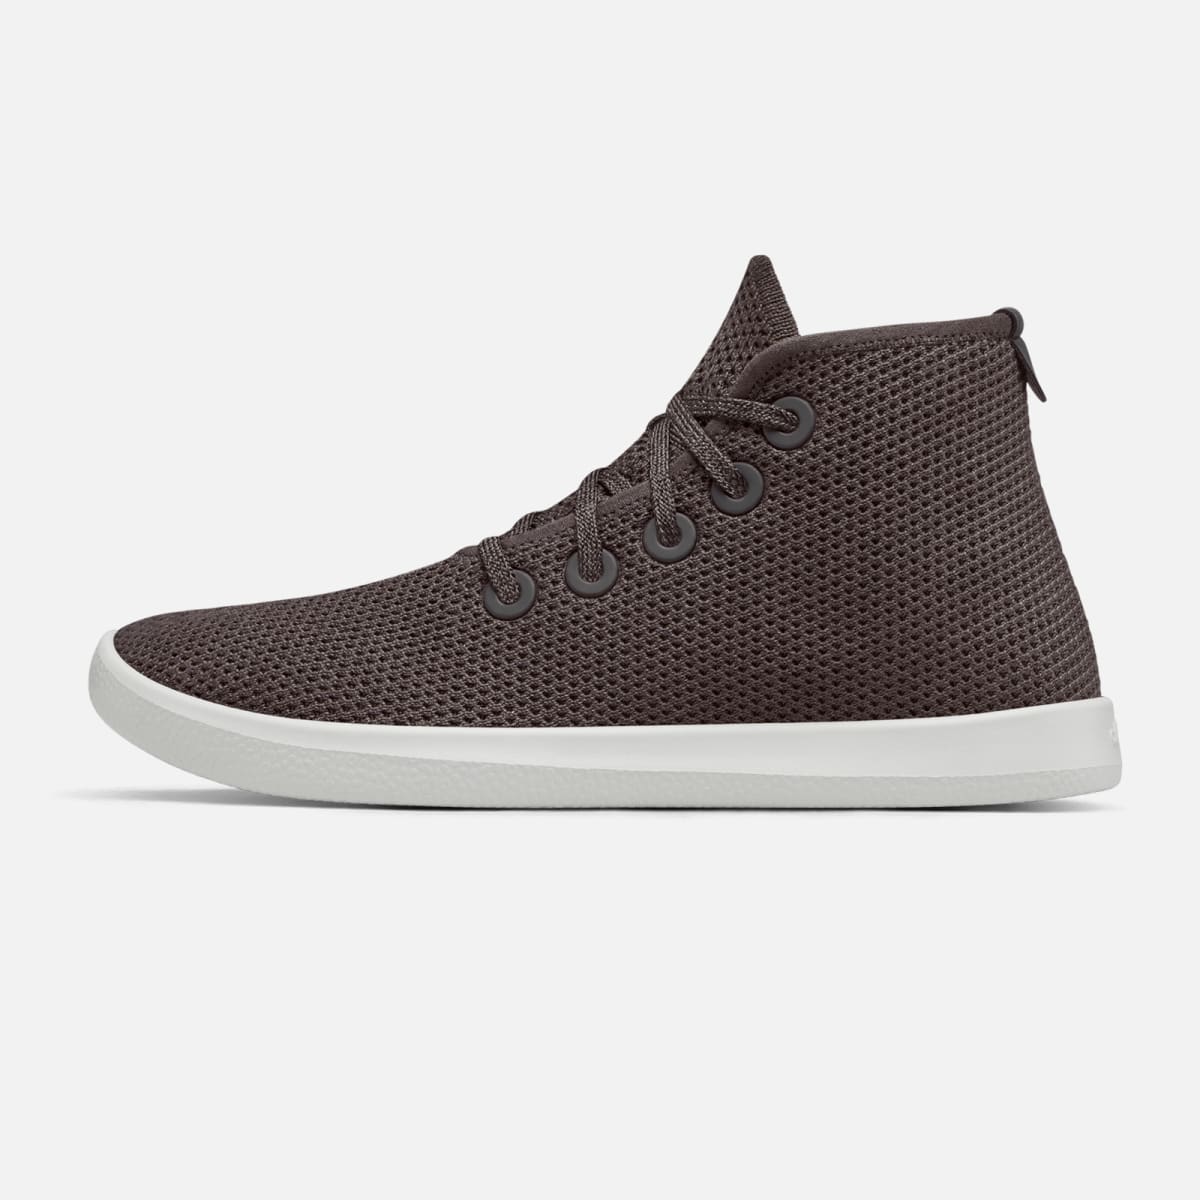 Comfortable High-Top Sneakers for 